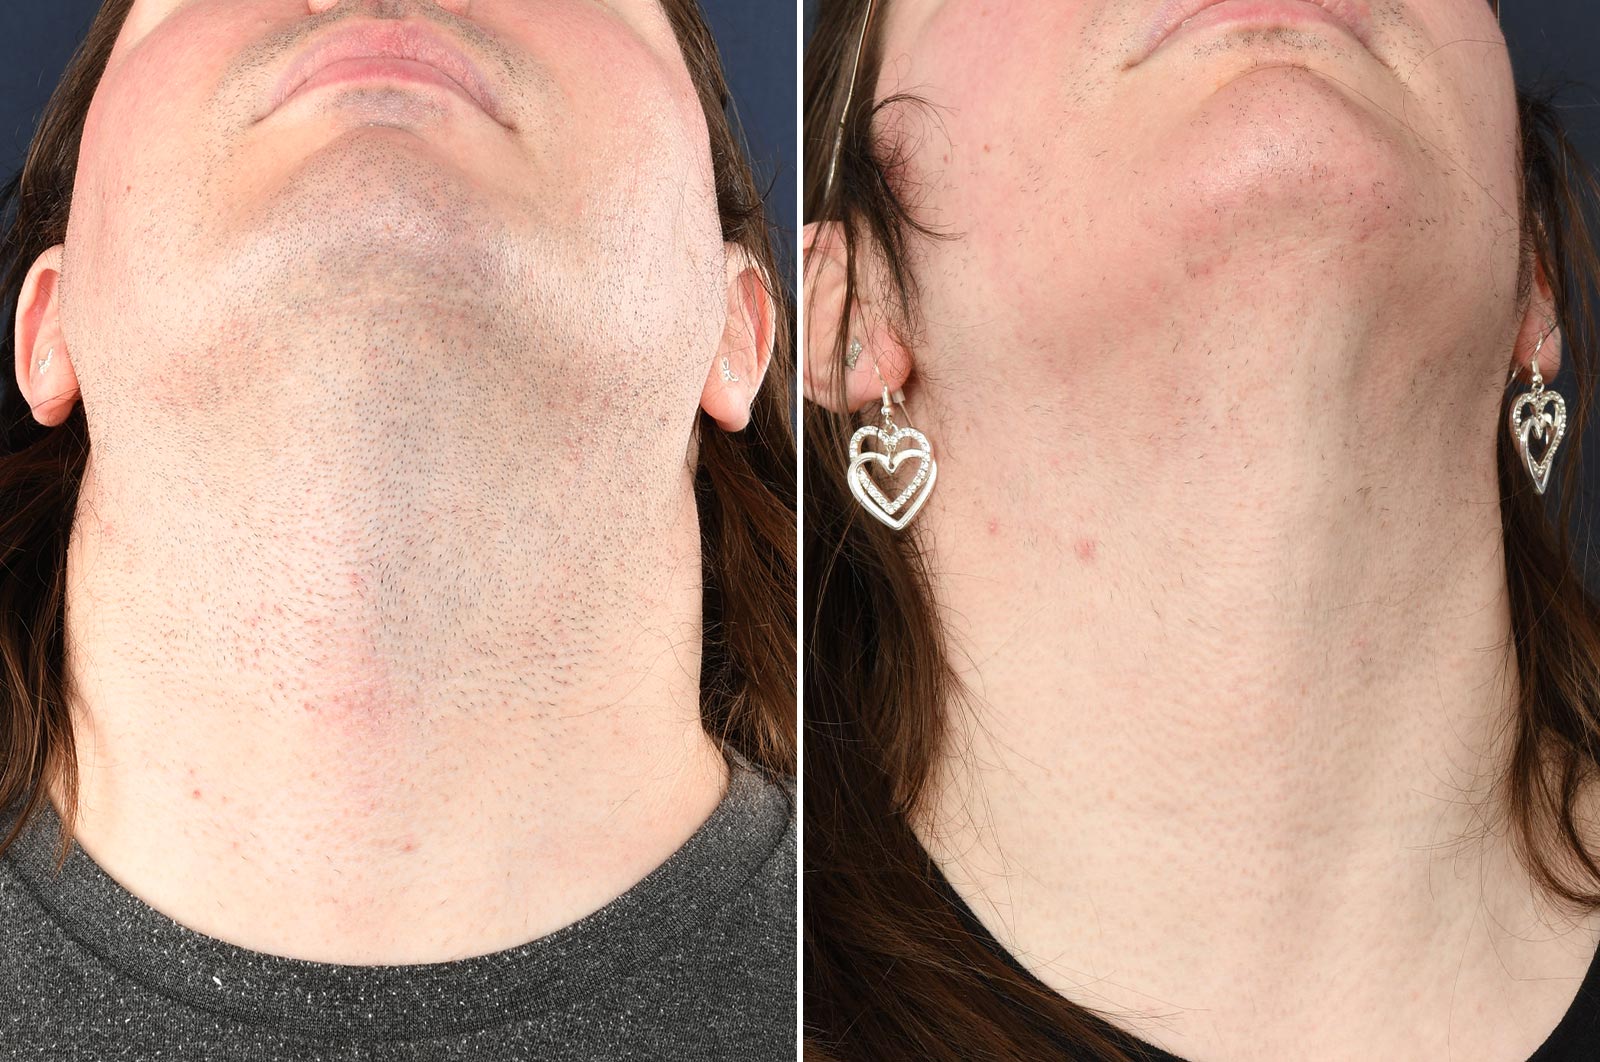 This is after 1 year of electrolysis hair removal treatments. 75 hours'  worth. I'm a 34yo female with a medical condition (PCOS) that's caused this  beard for the last 17 years of